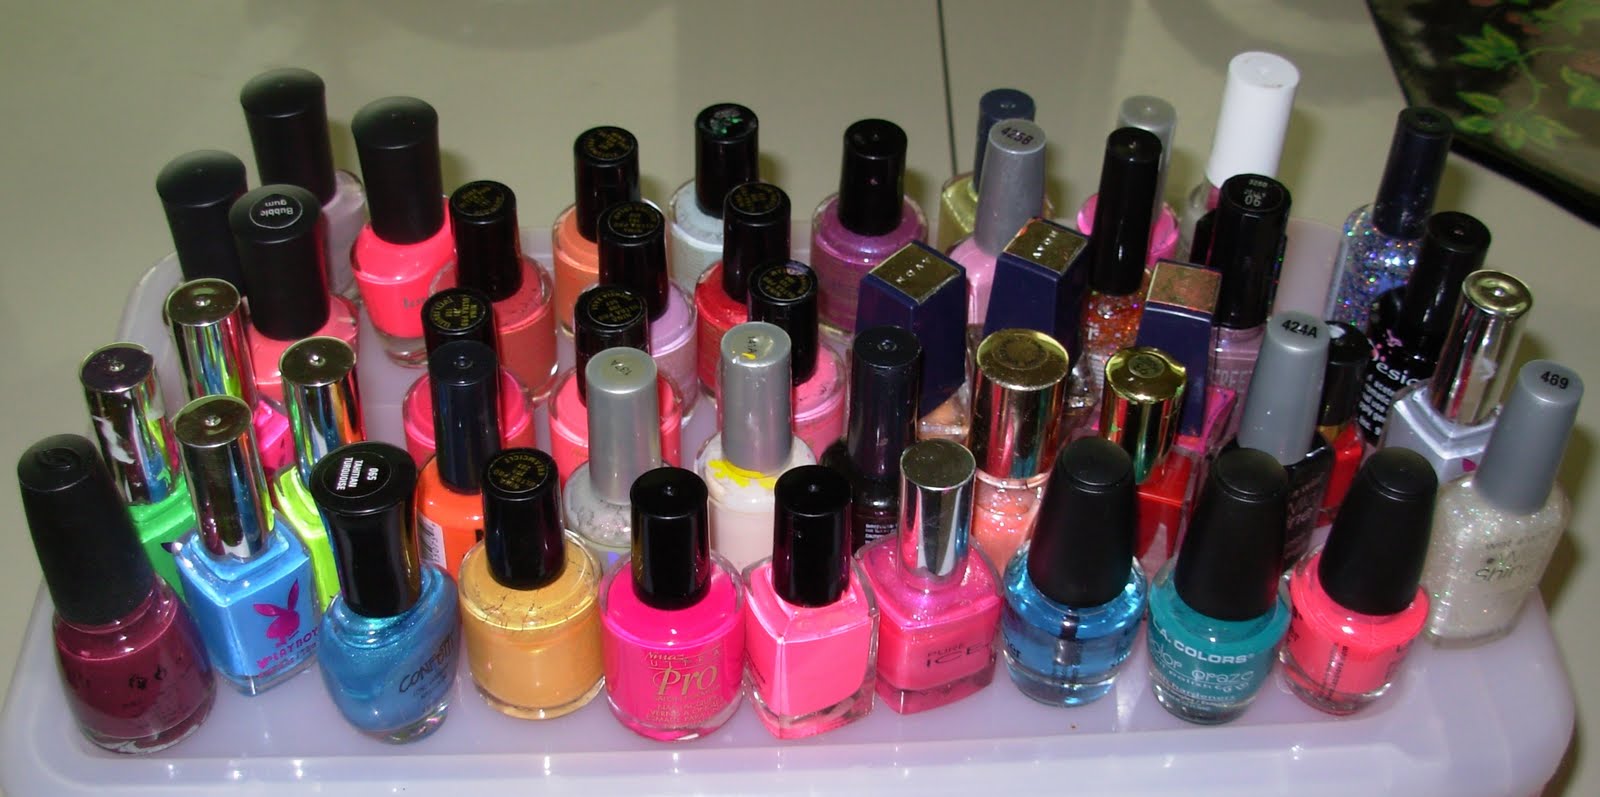 7. Orly Nail Polish Collection Kit - wide 6